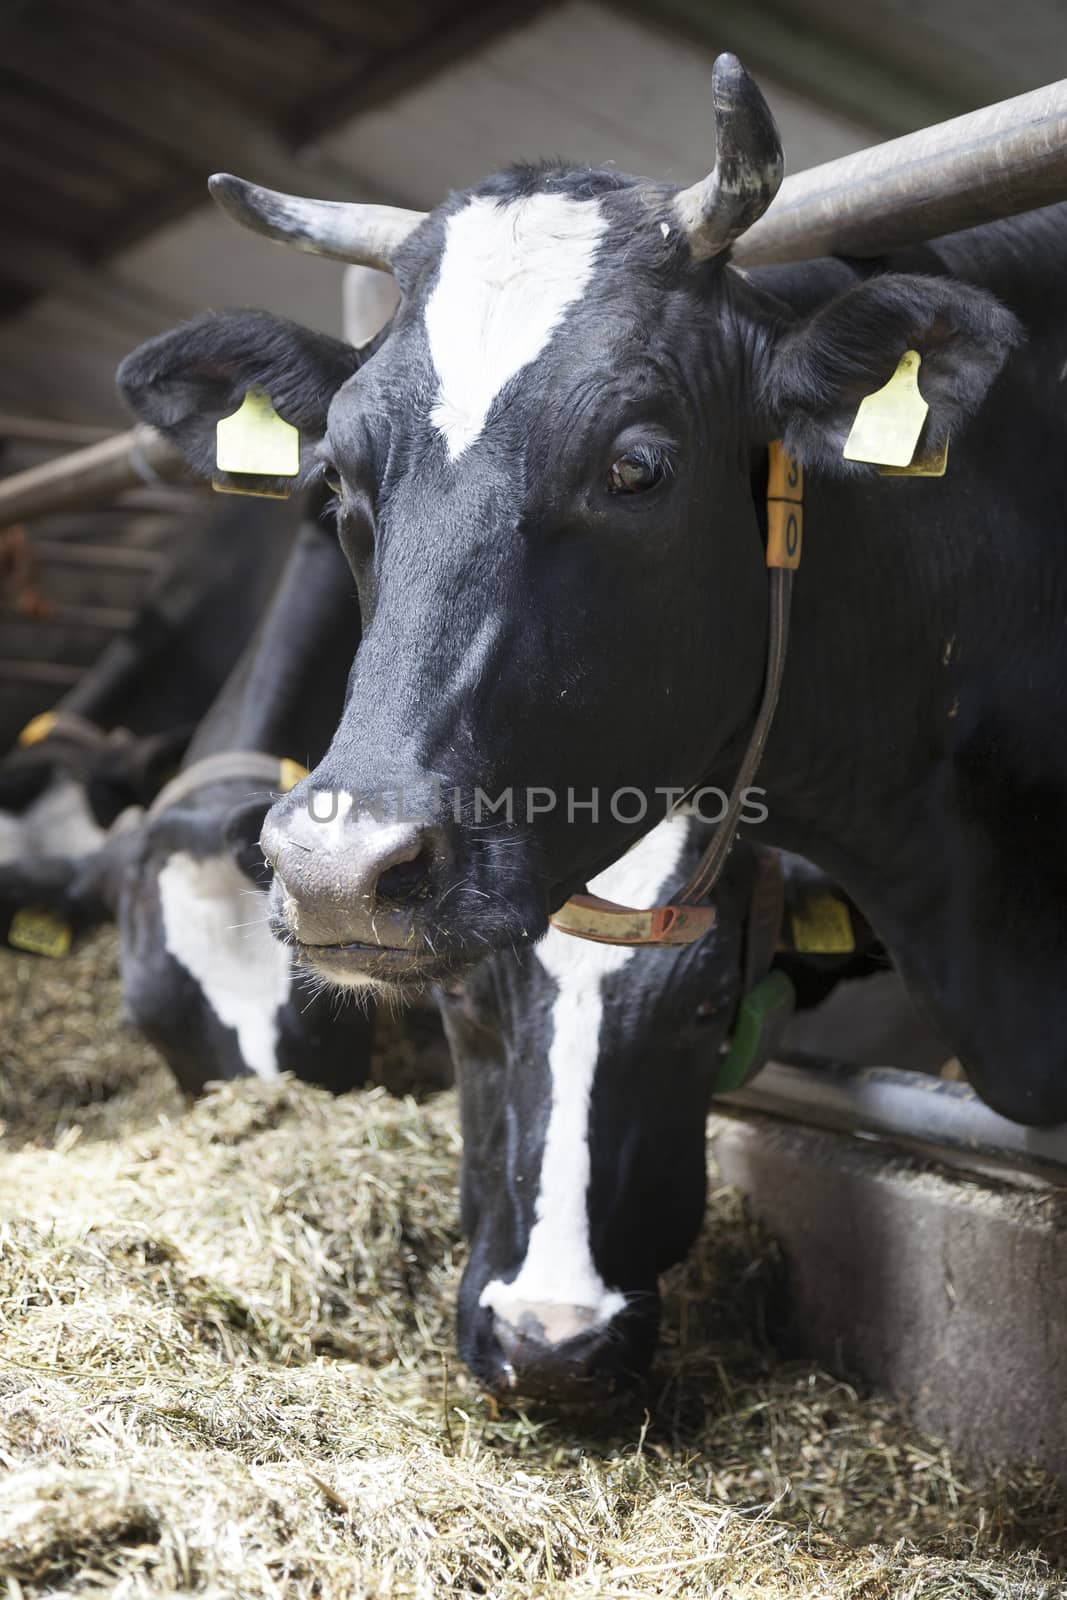 black and white cow with horns in stable looks